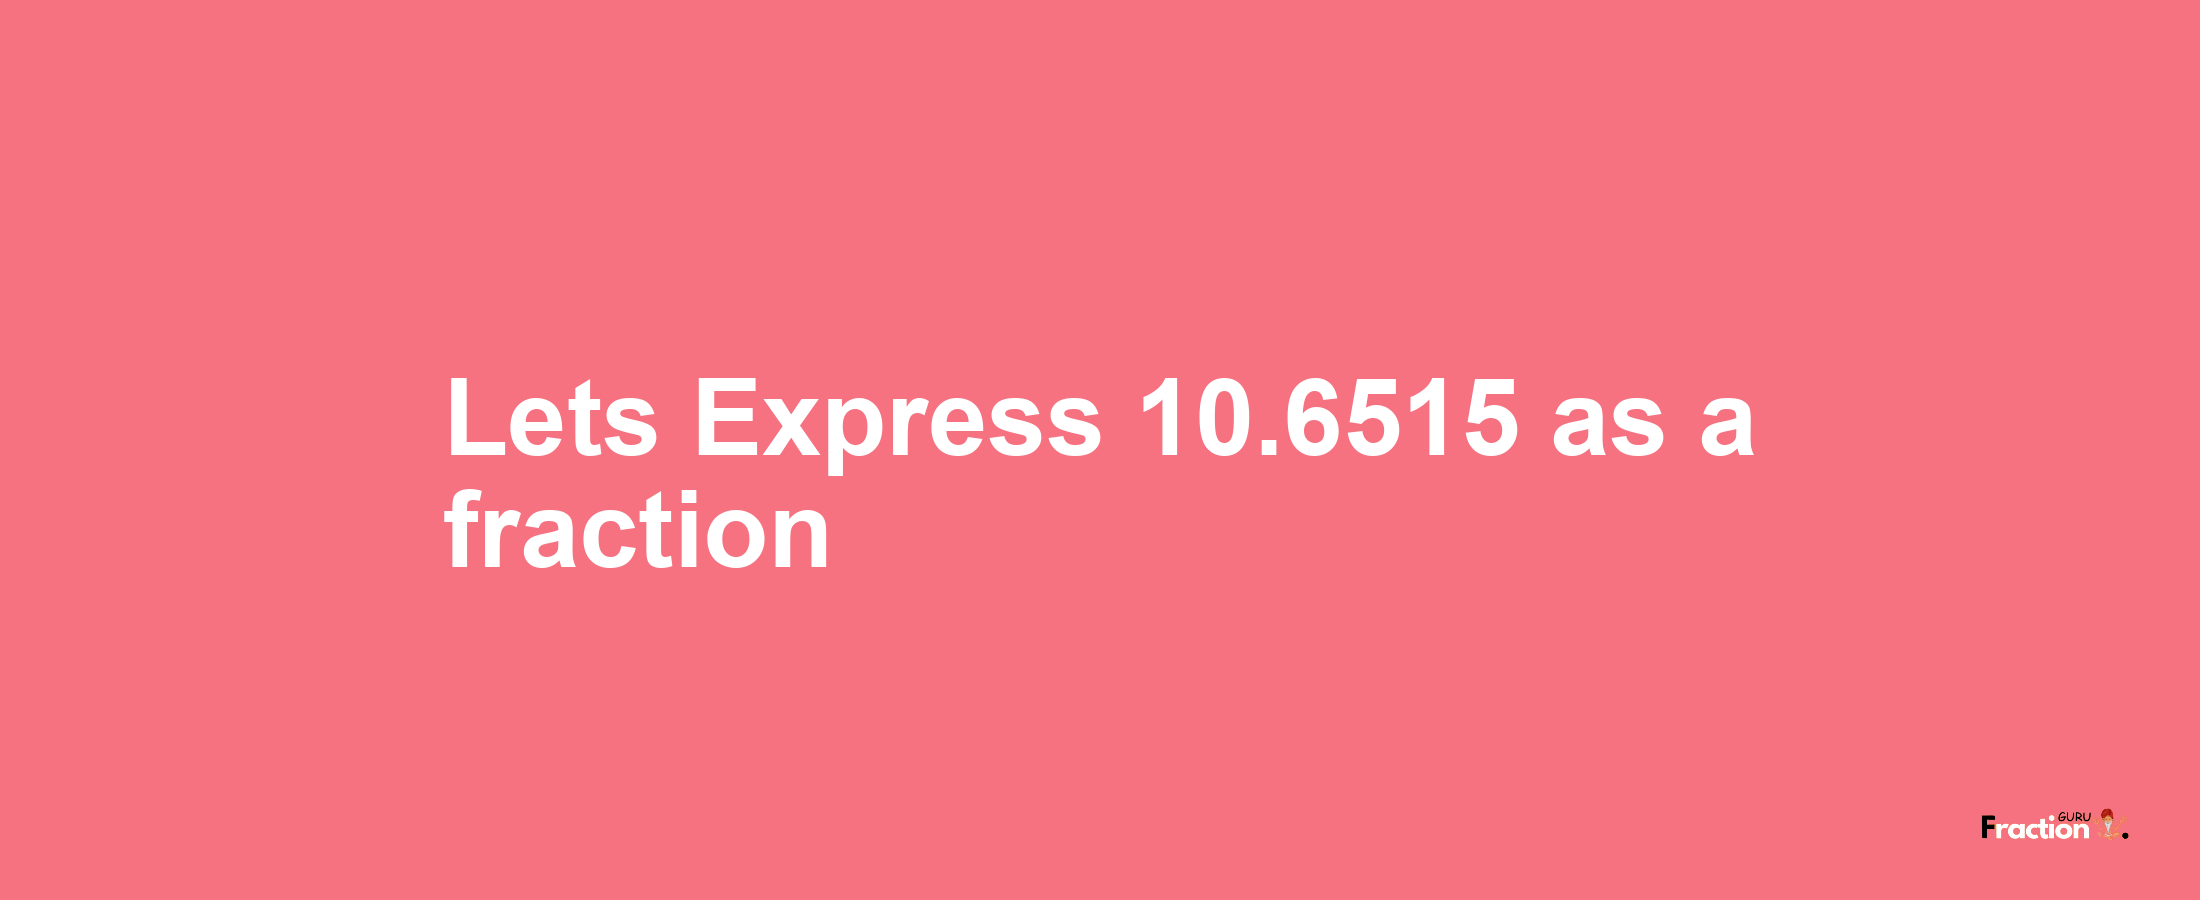 Lets Express 10.6515 as afraction